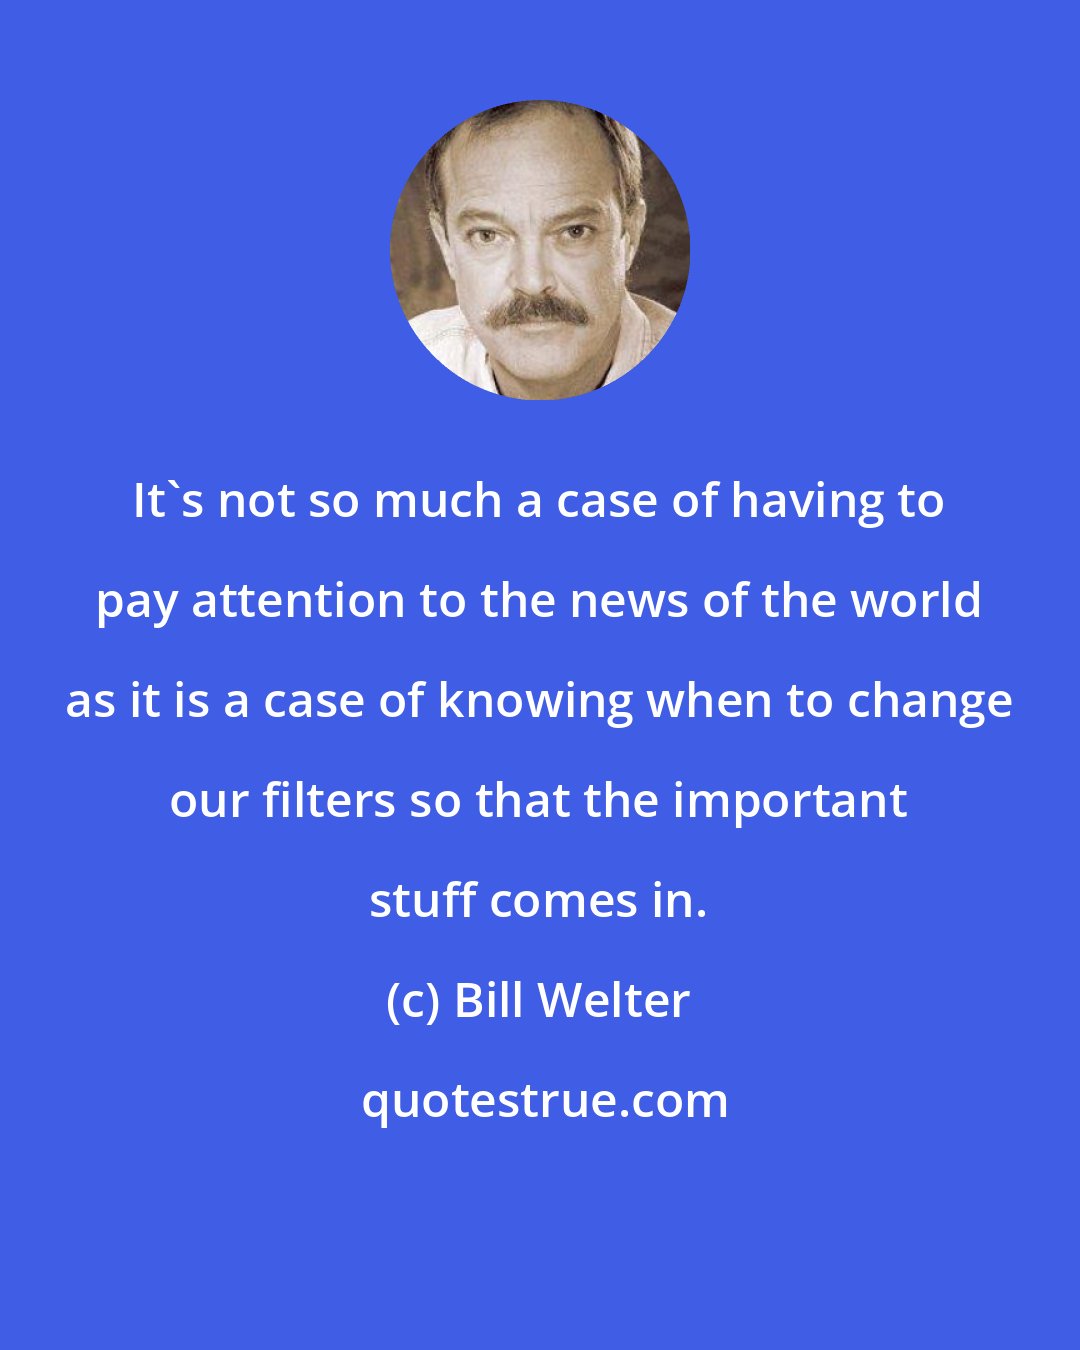 Bill Welter: It's not so much a case of having to pay attention to the news of the world as it is a case of knowing when to change our filters so that the important stuff comes in.